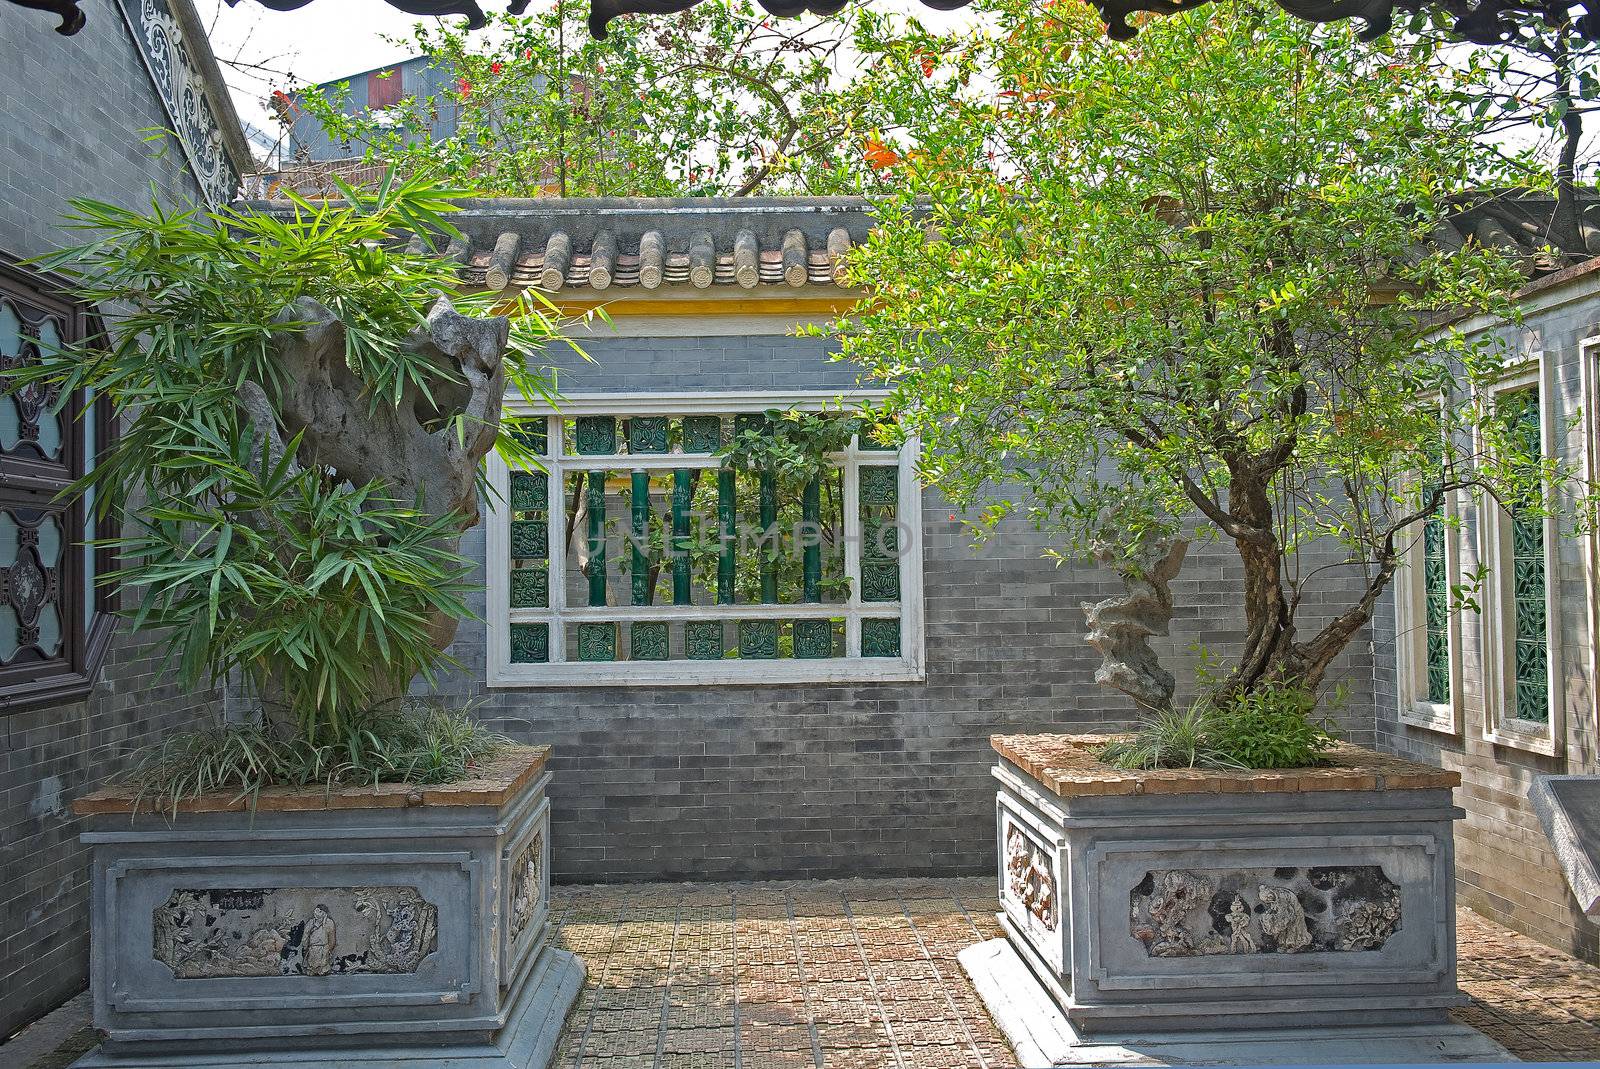 Qinghui garden potted plants by Marcus